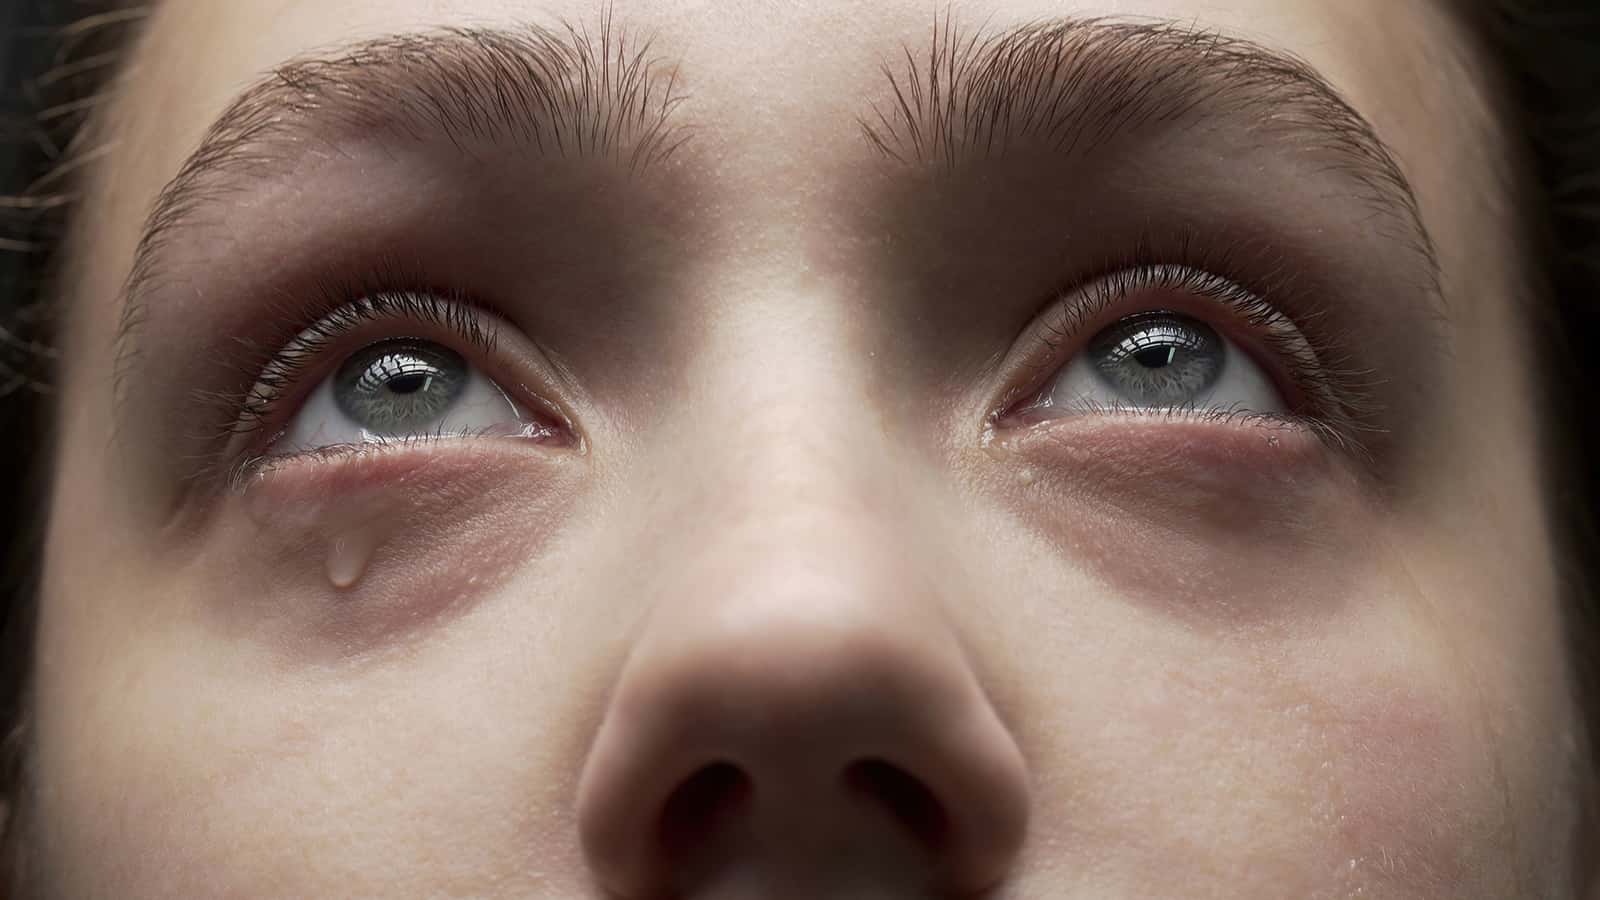 Researchers Explain the Three Types of Tears (And What They Mean)